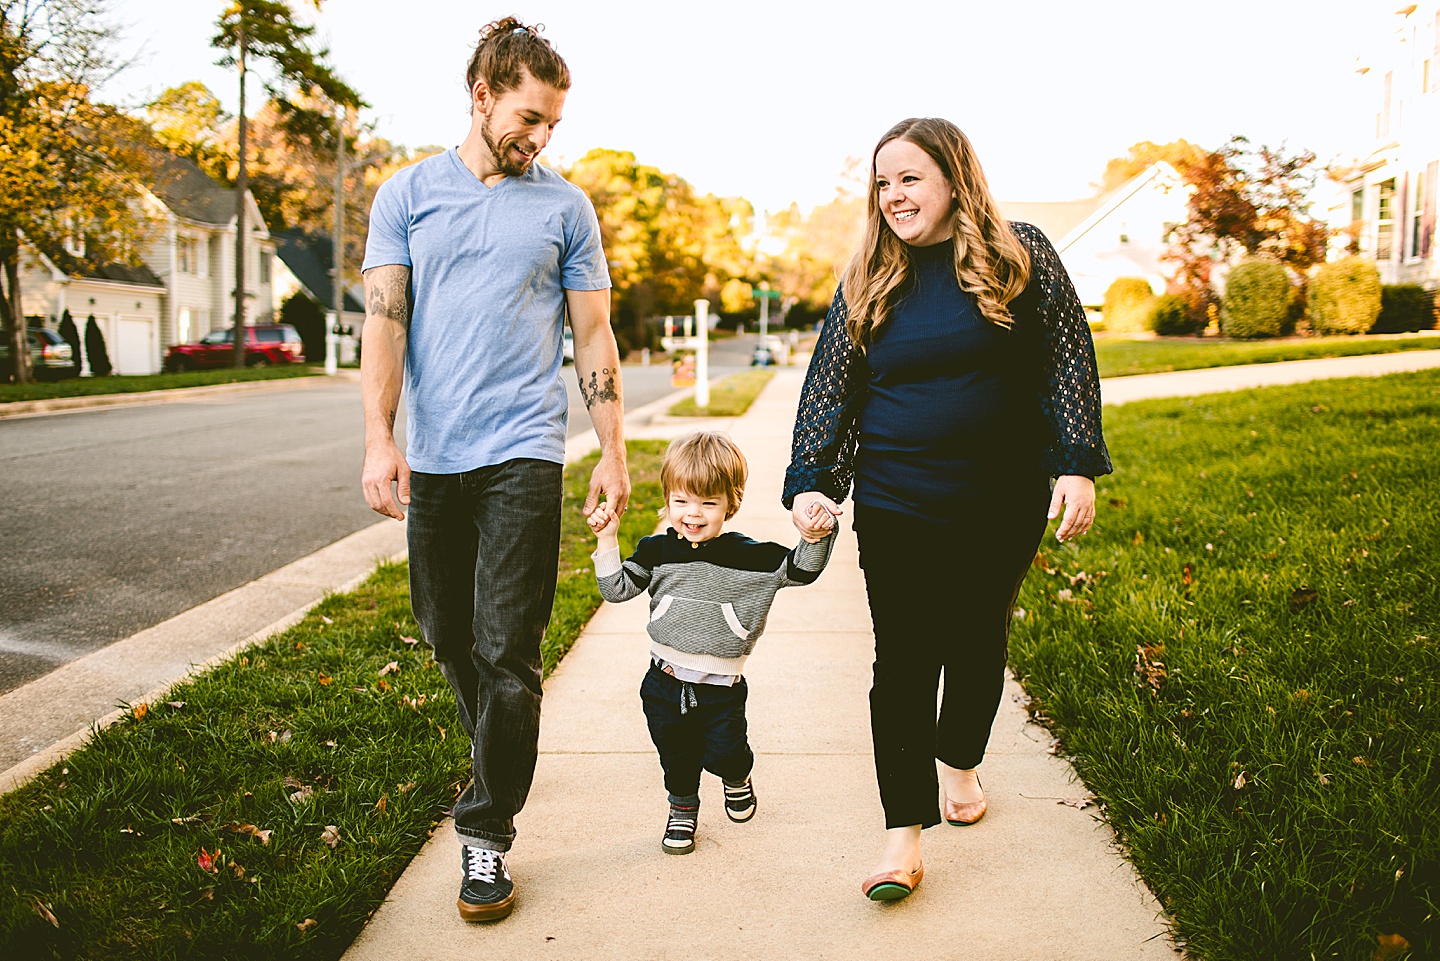 Toddler going on walk with parents